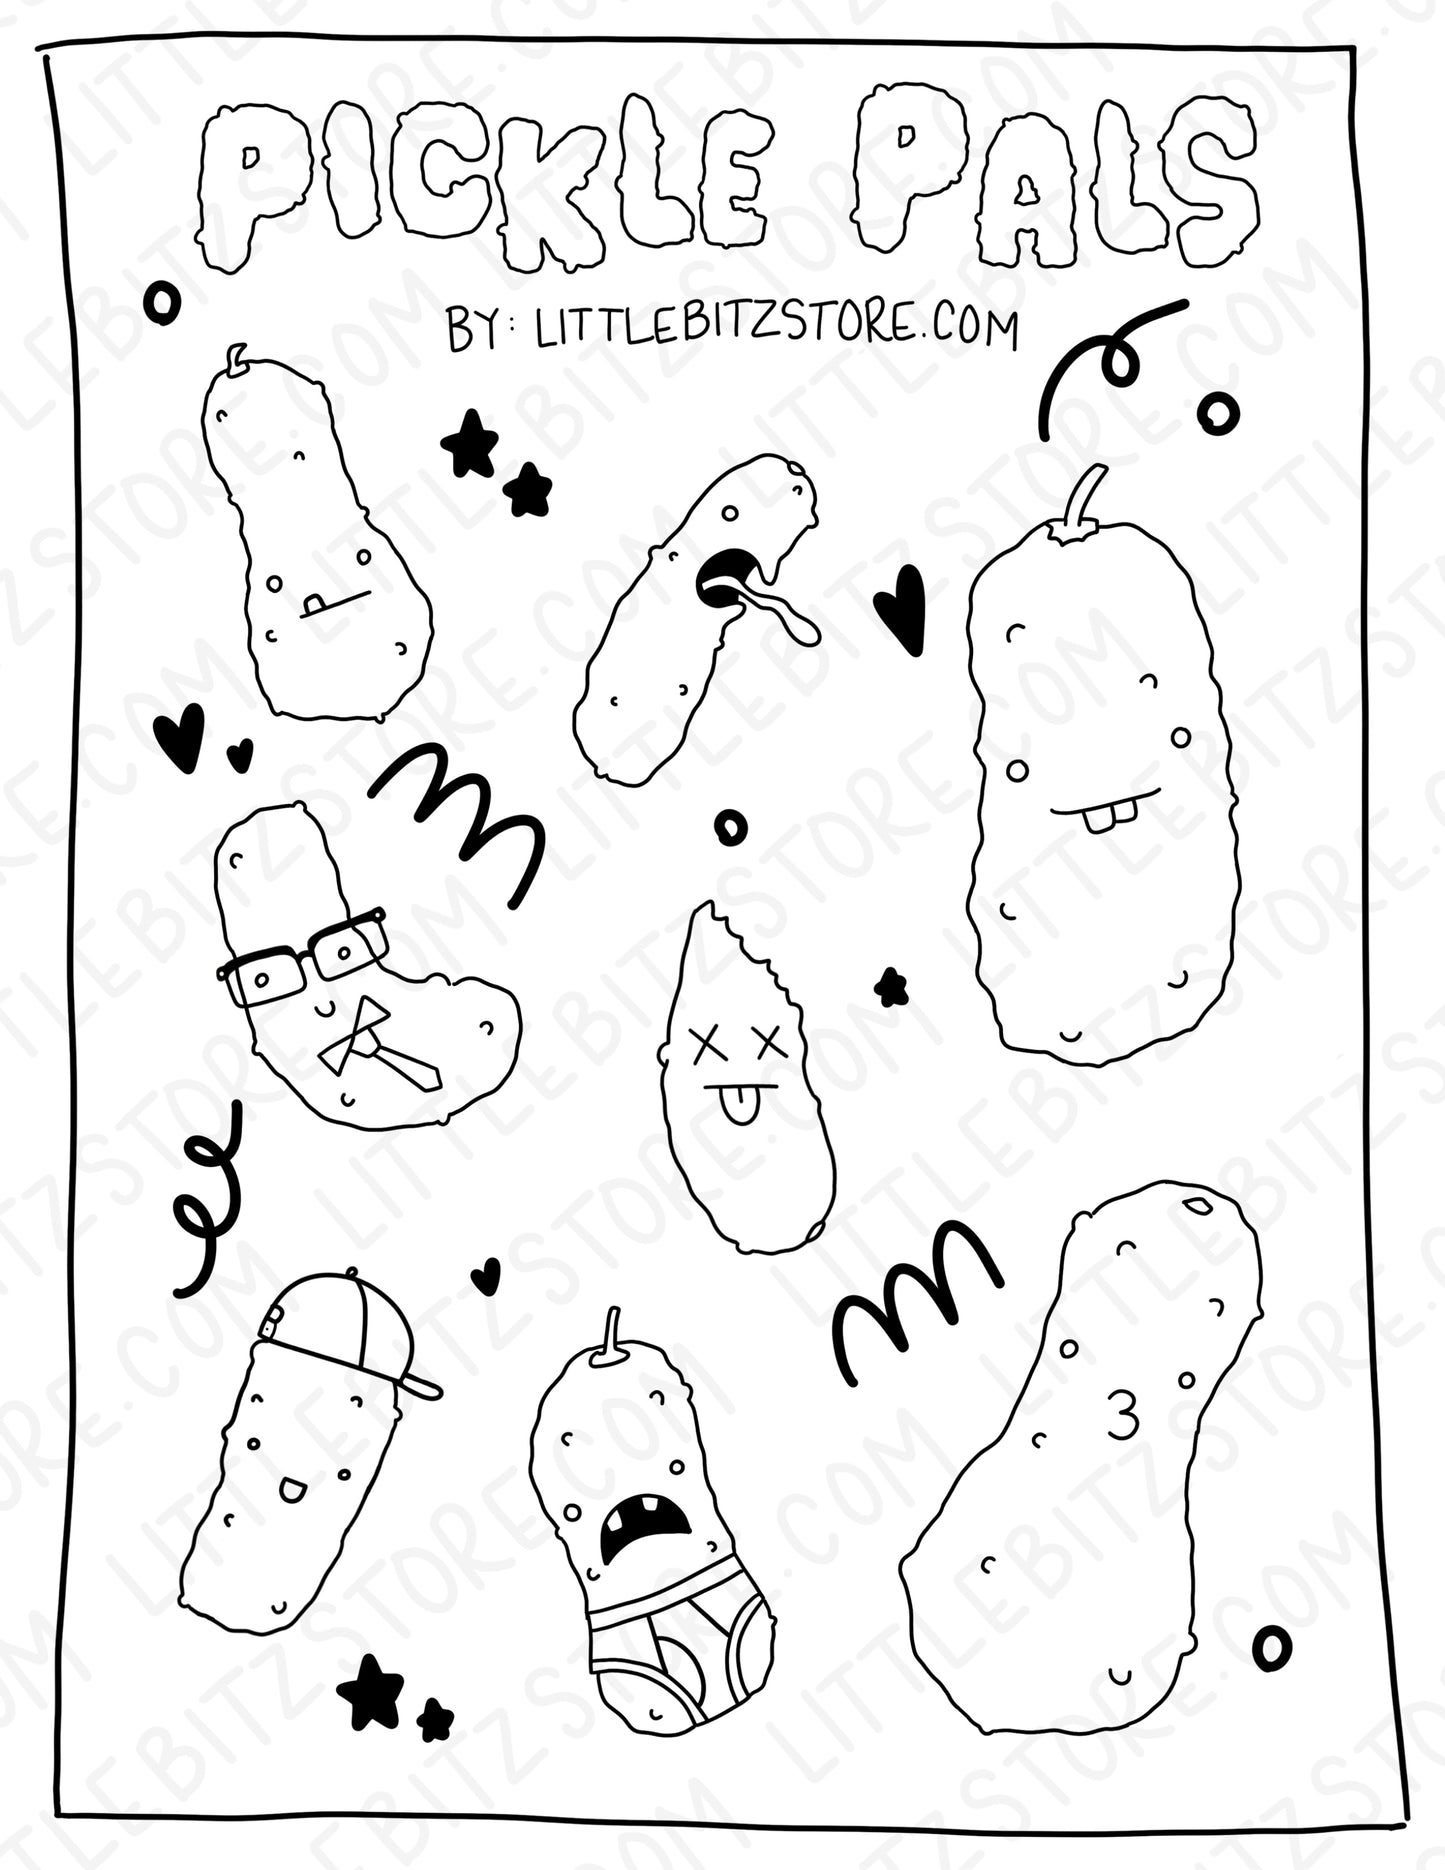 Pickle Pals Coloring Page - *Digital Download*